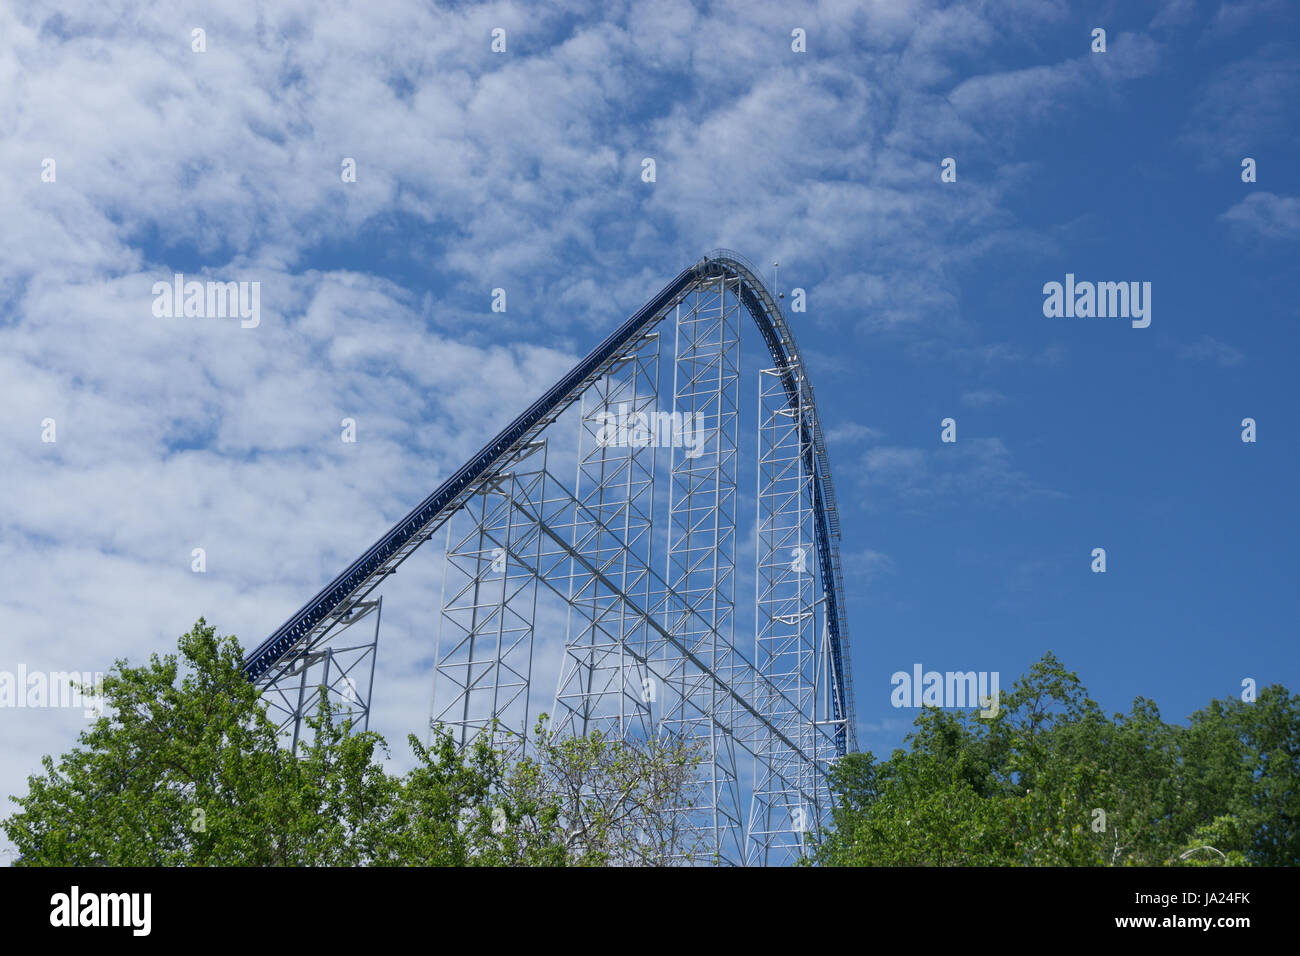 Large Roller Coaster Hill Stock Photo